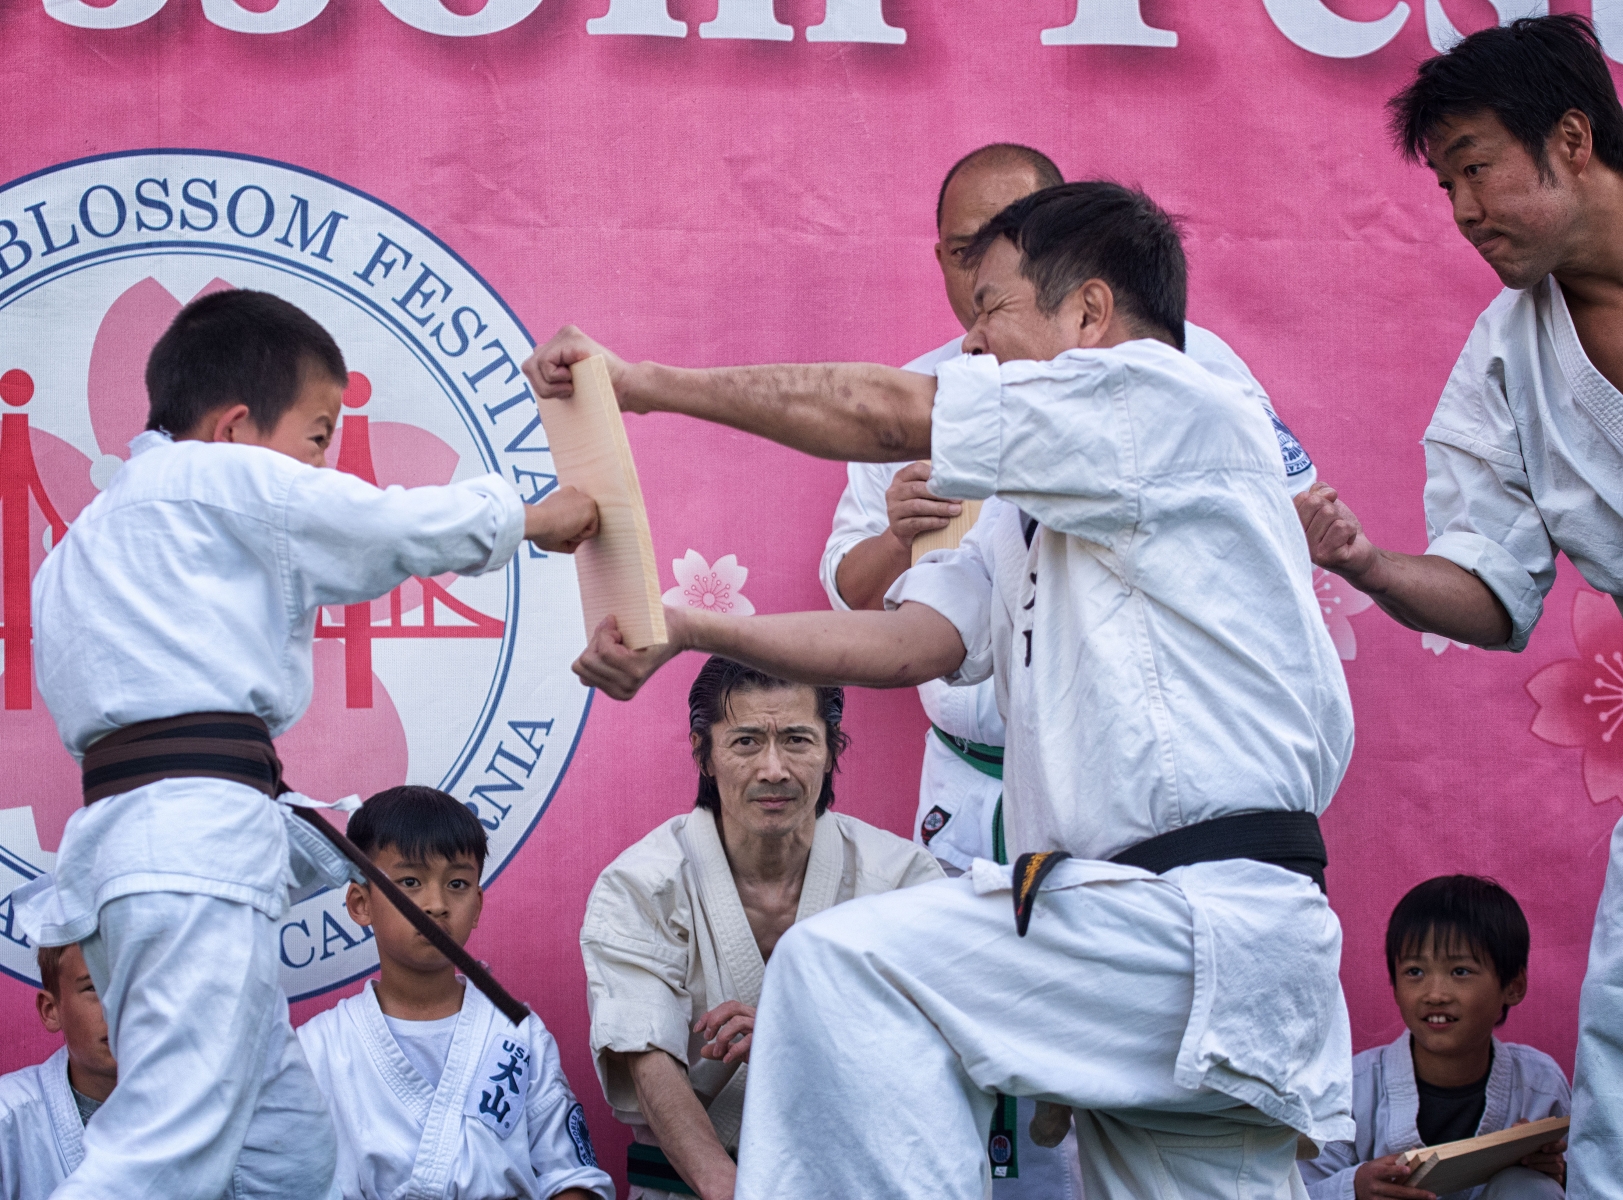 A karate-kid attempts to break a board with his fist at the Cherry Blossom Festival in San Francisco Japantown.  April 13th, 2019.